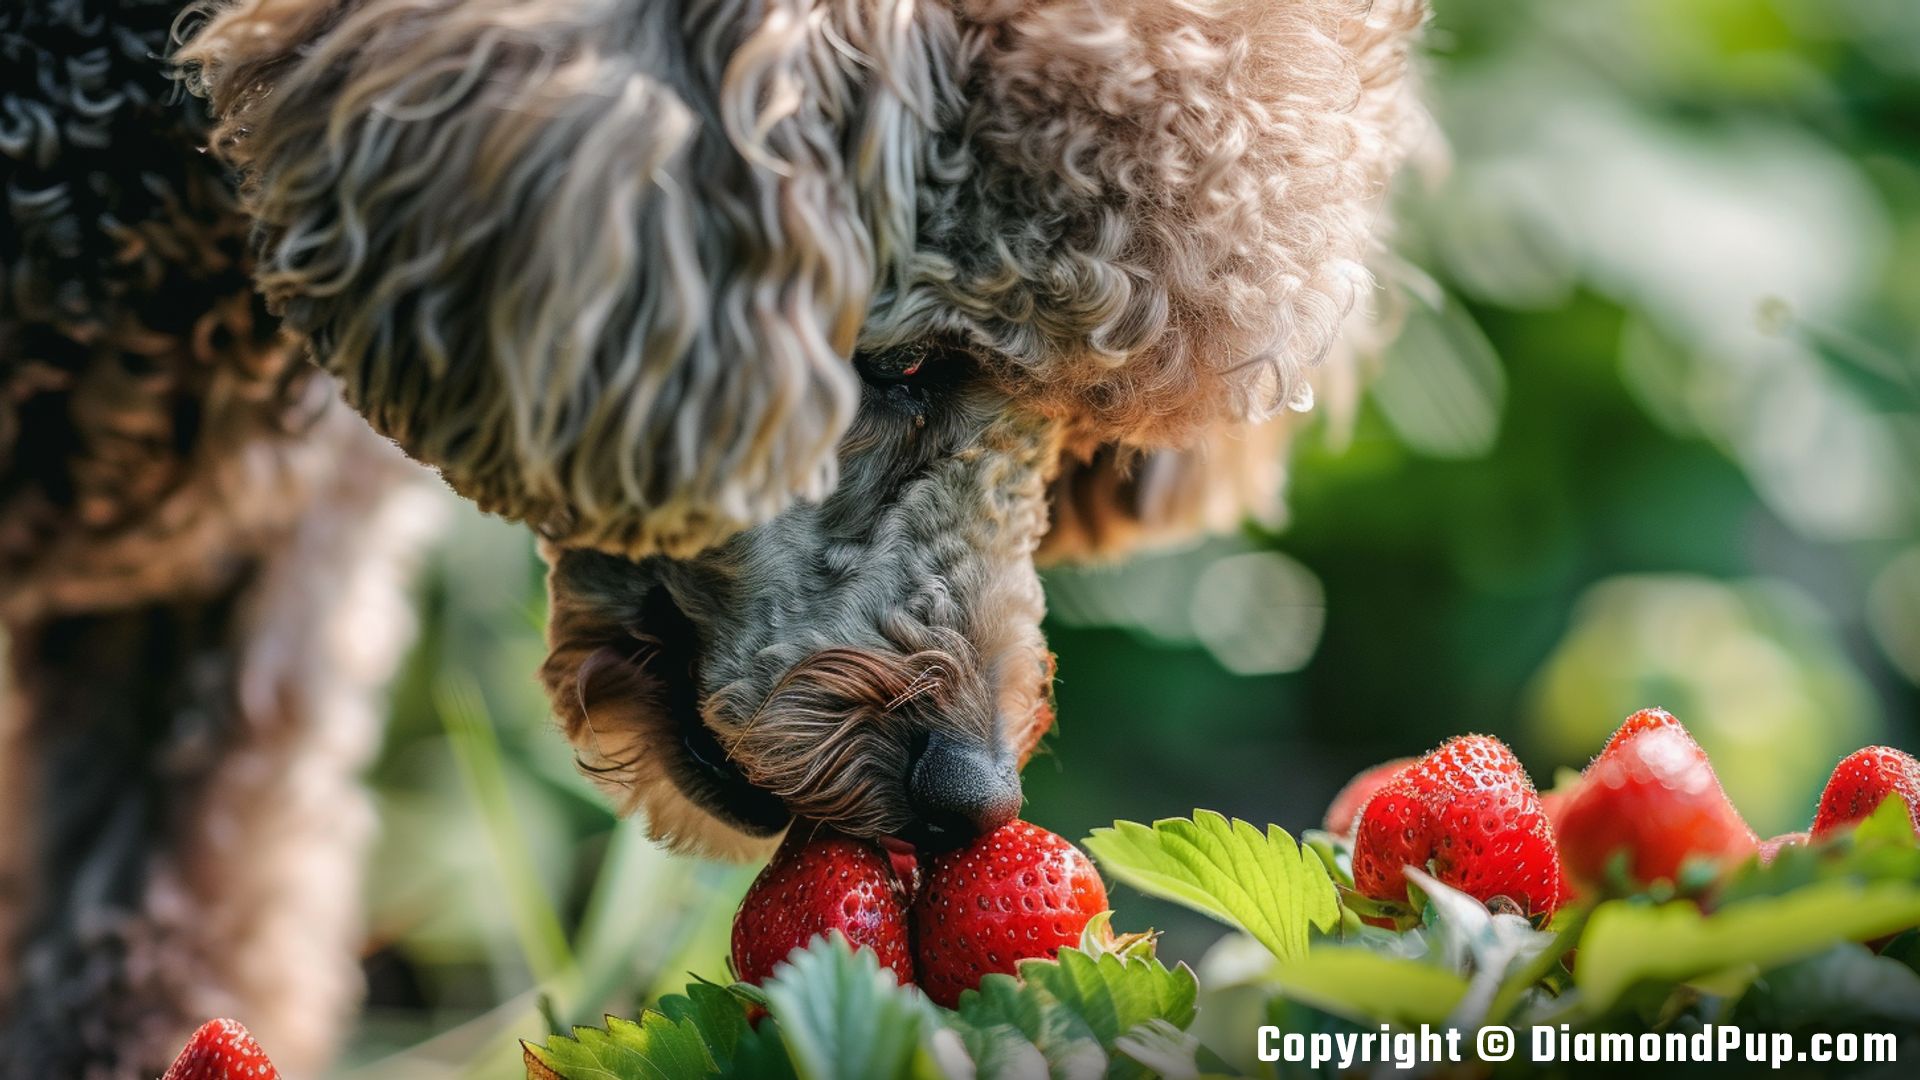 Photograph of a Playful Poodle Snacking on Strawberries